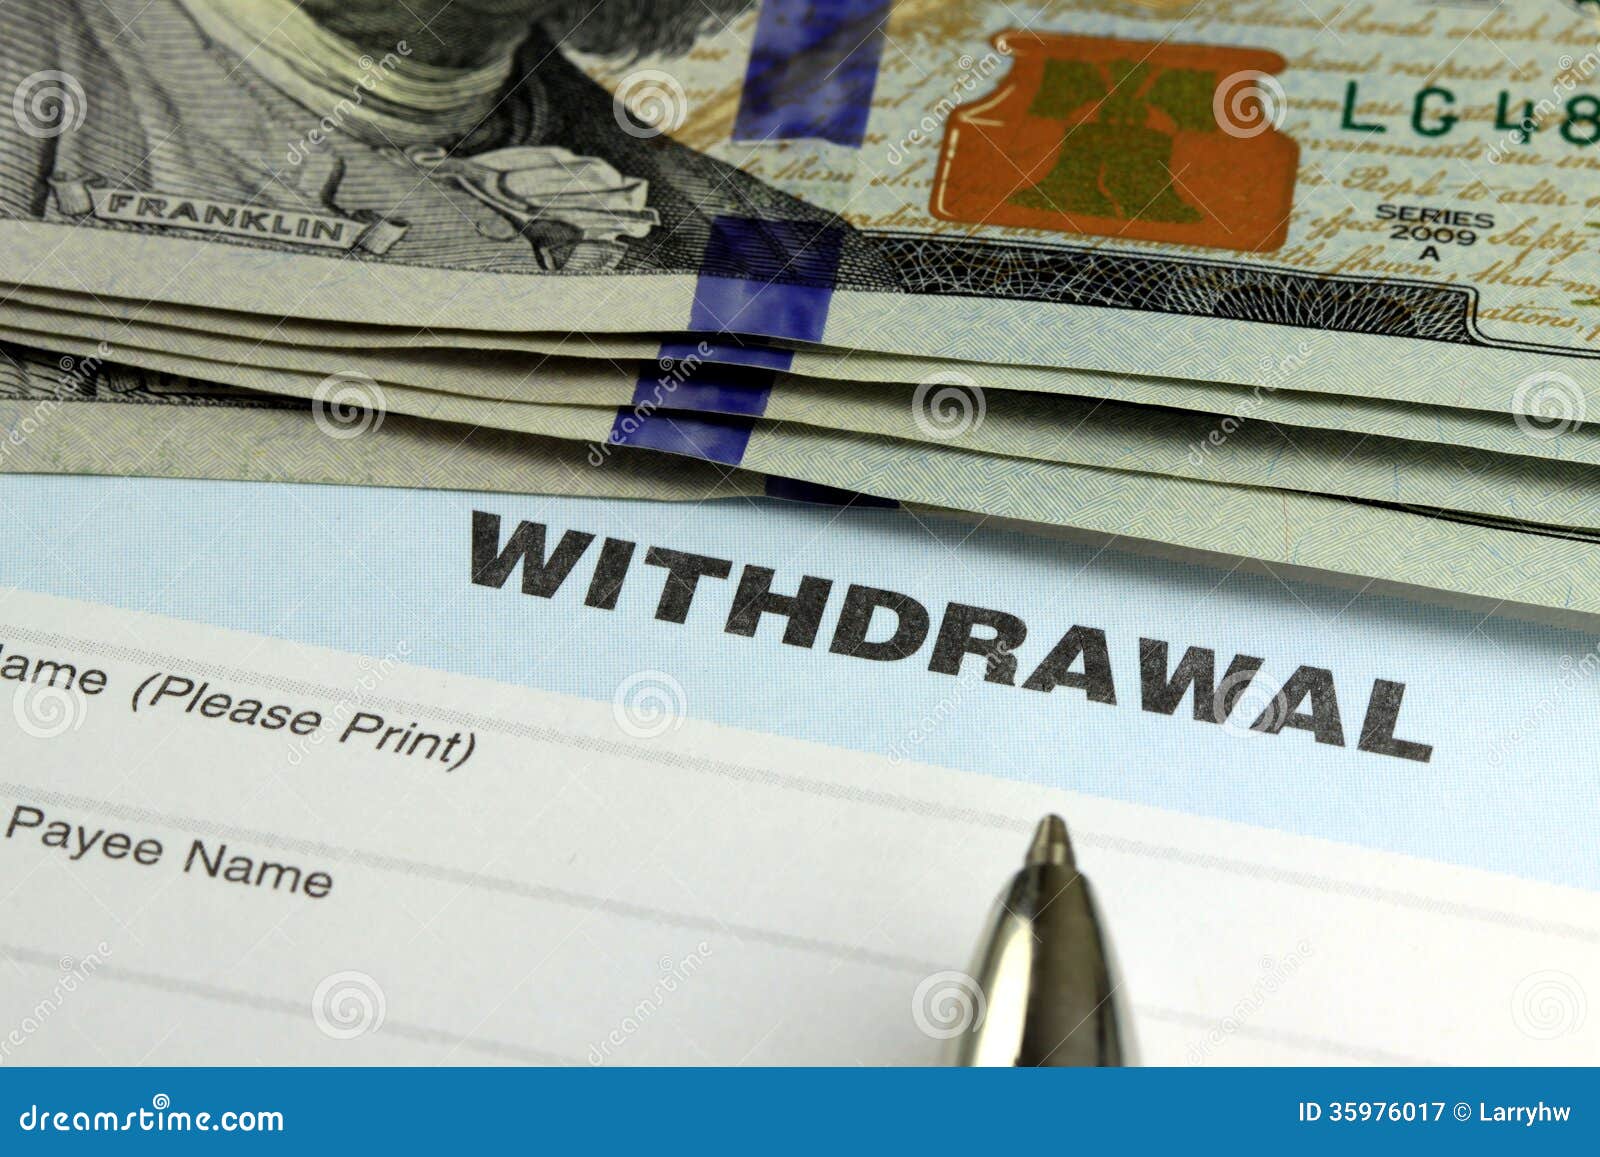 what is bank withdrawal slip